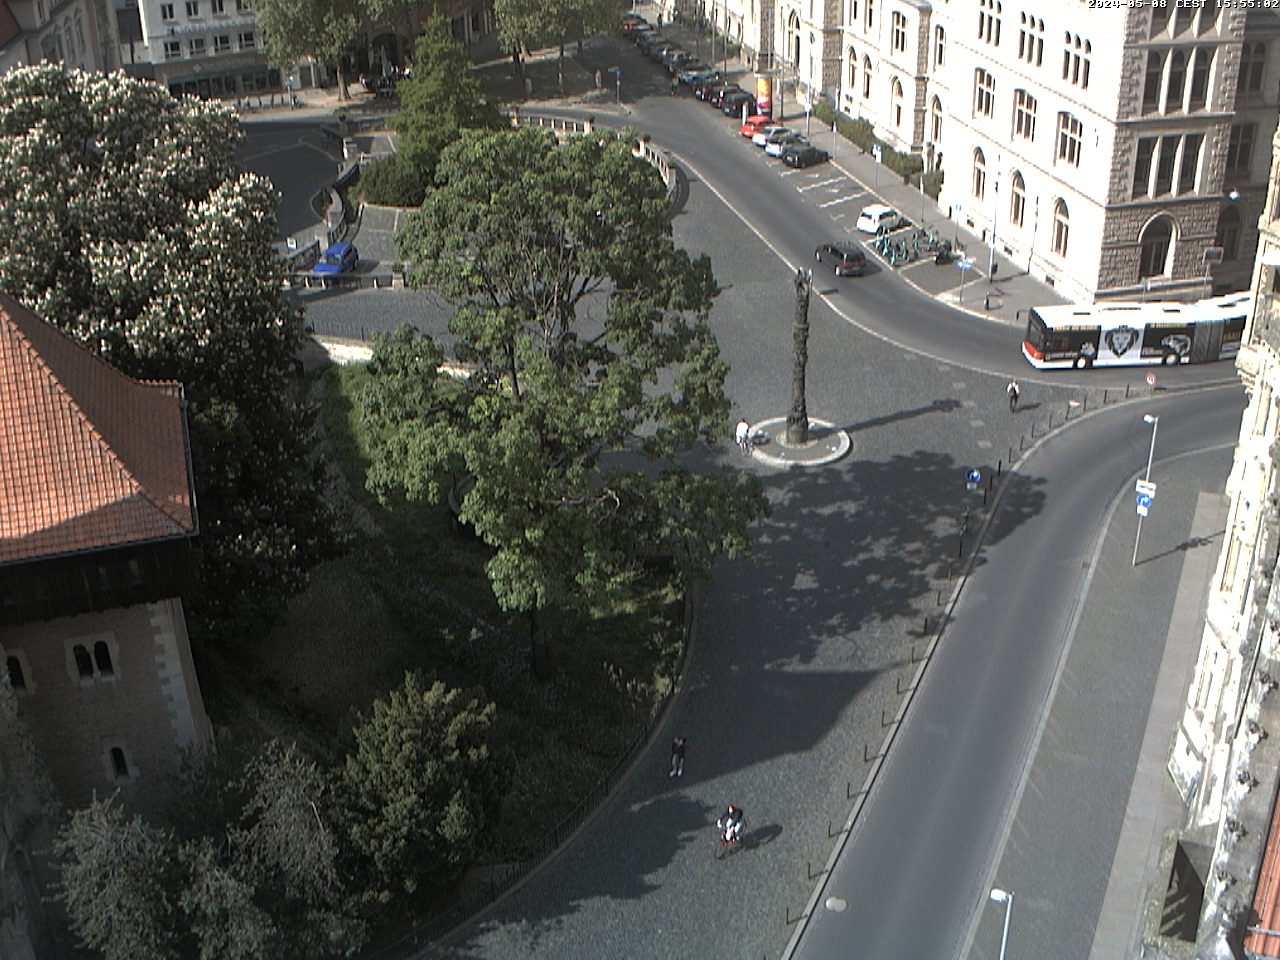 The view from the tower of city hall of Ruhfäutchenplatz